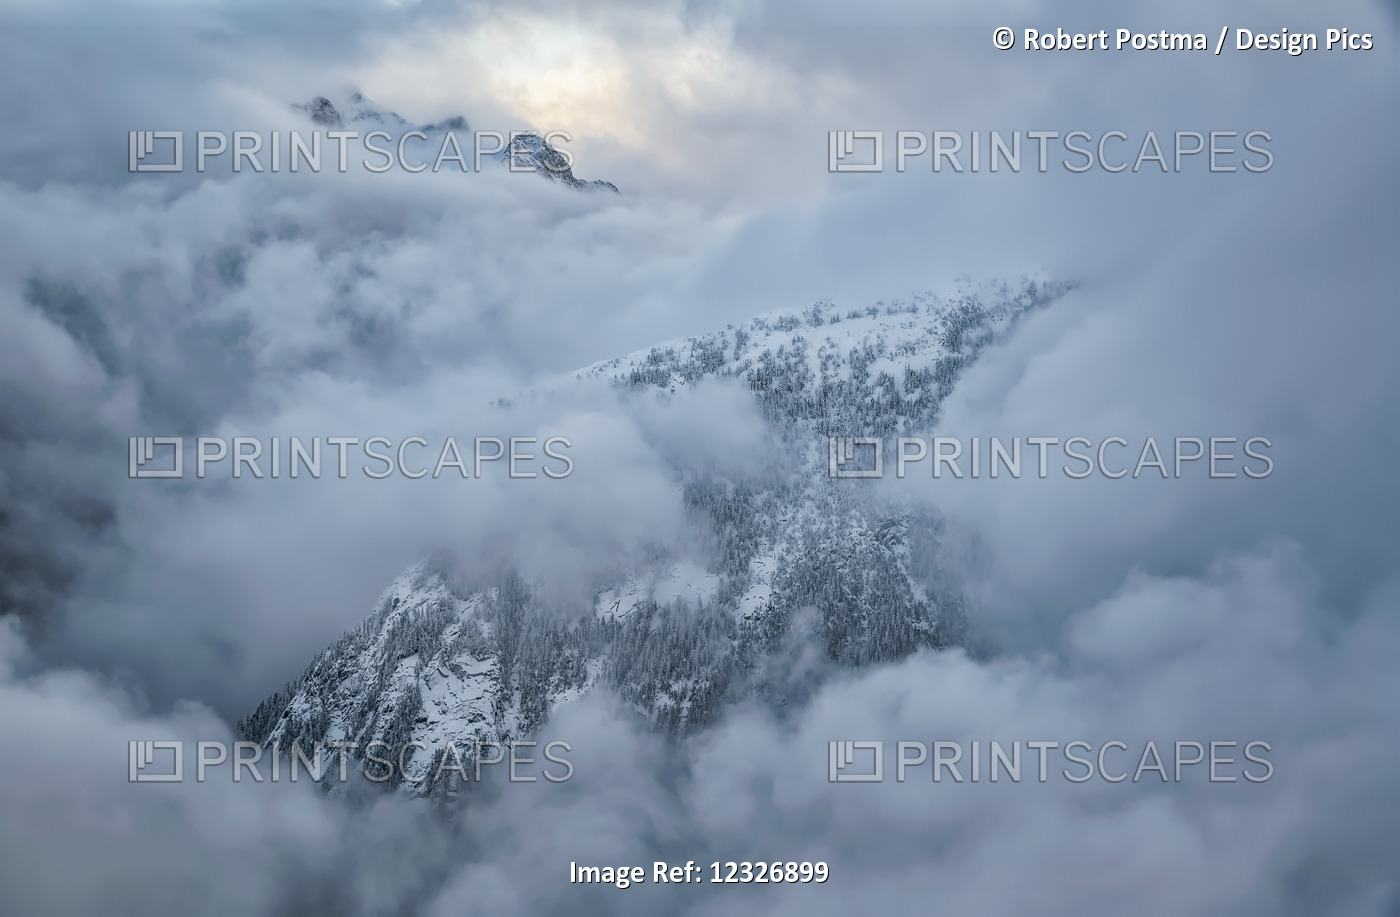 The Mountains Of Golden Ears Provincial Park Are Shrouded In Clouds In The ...